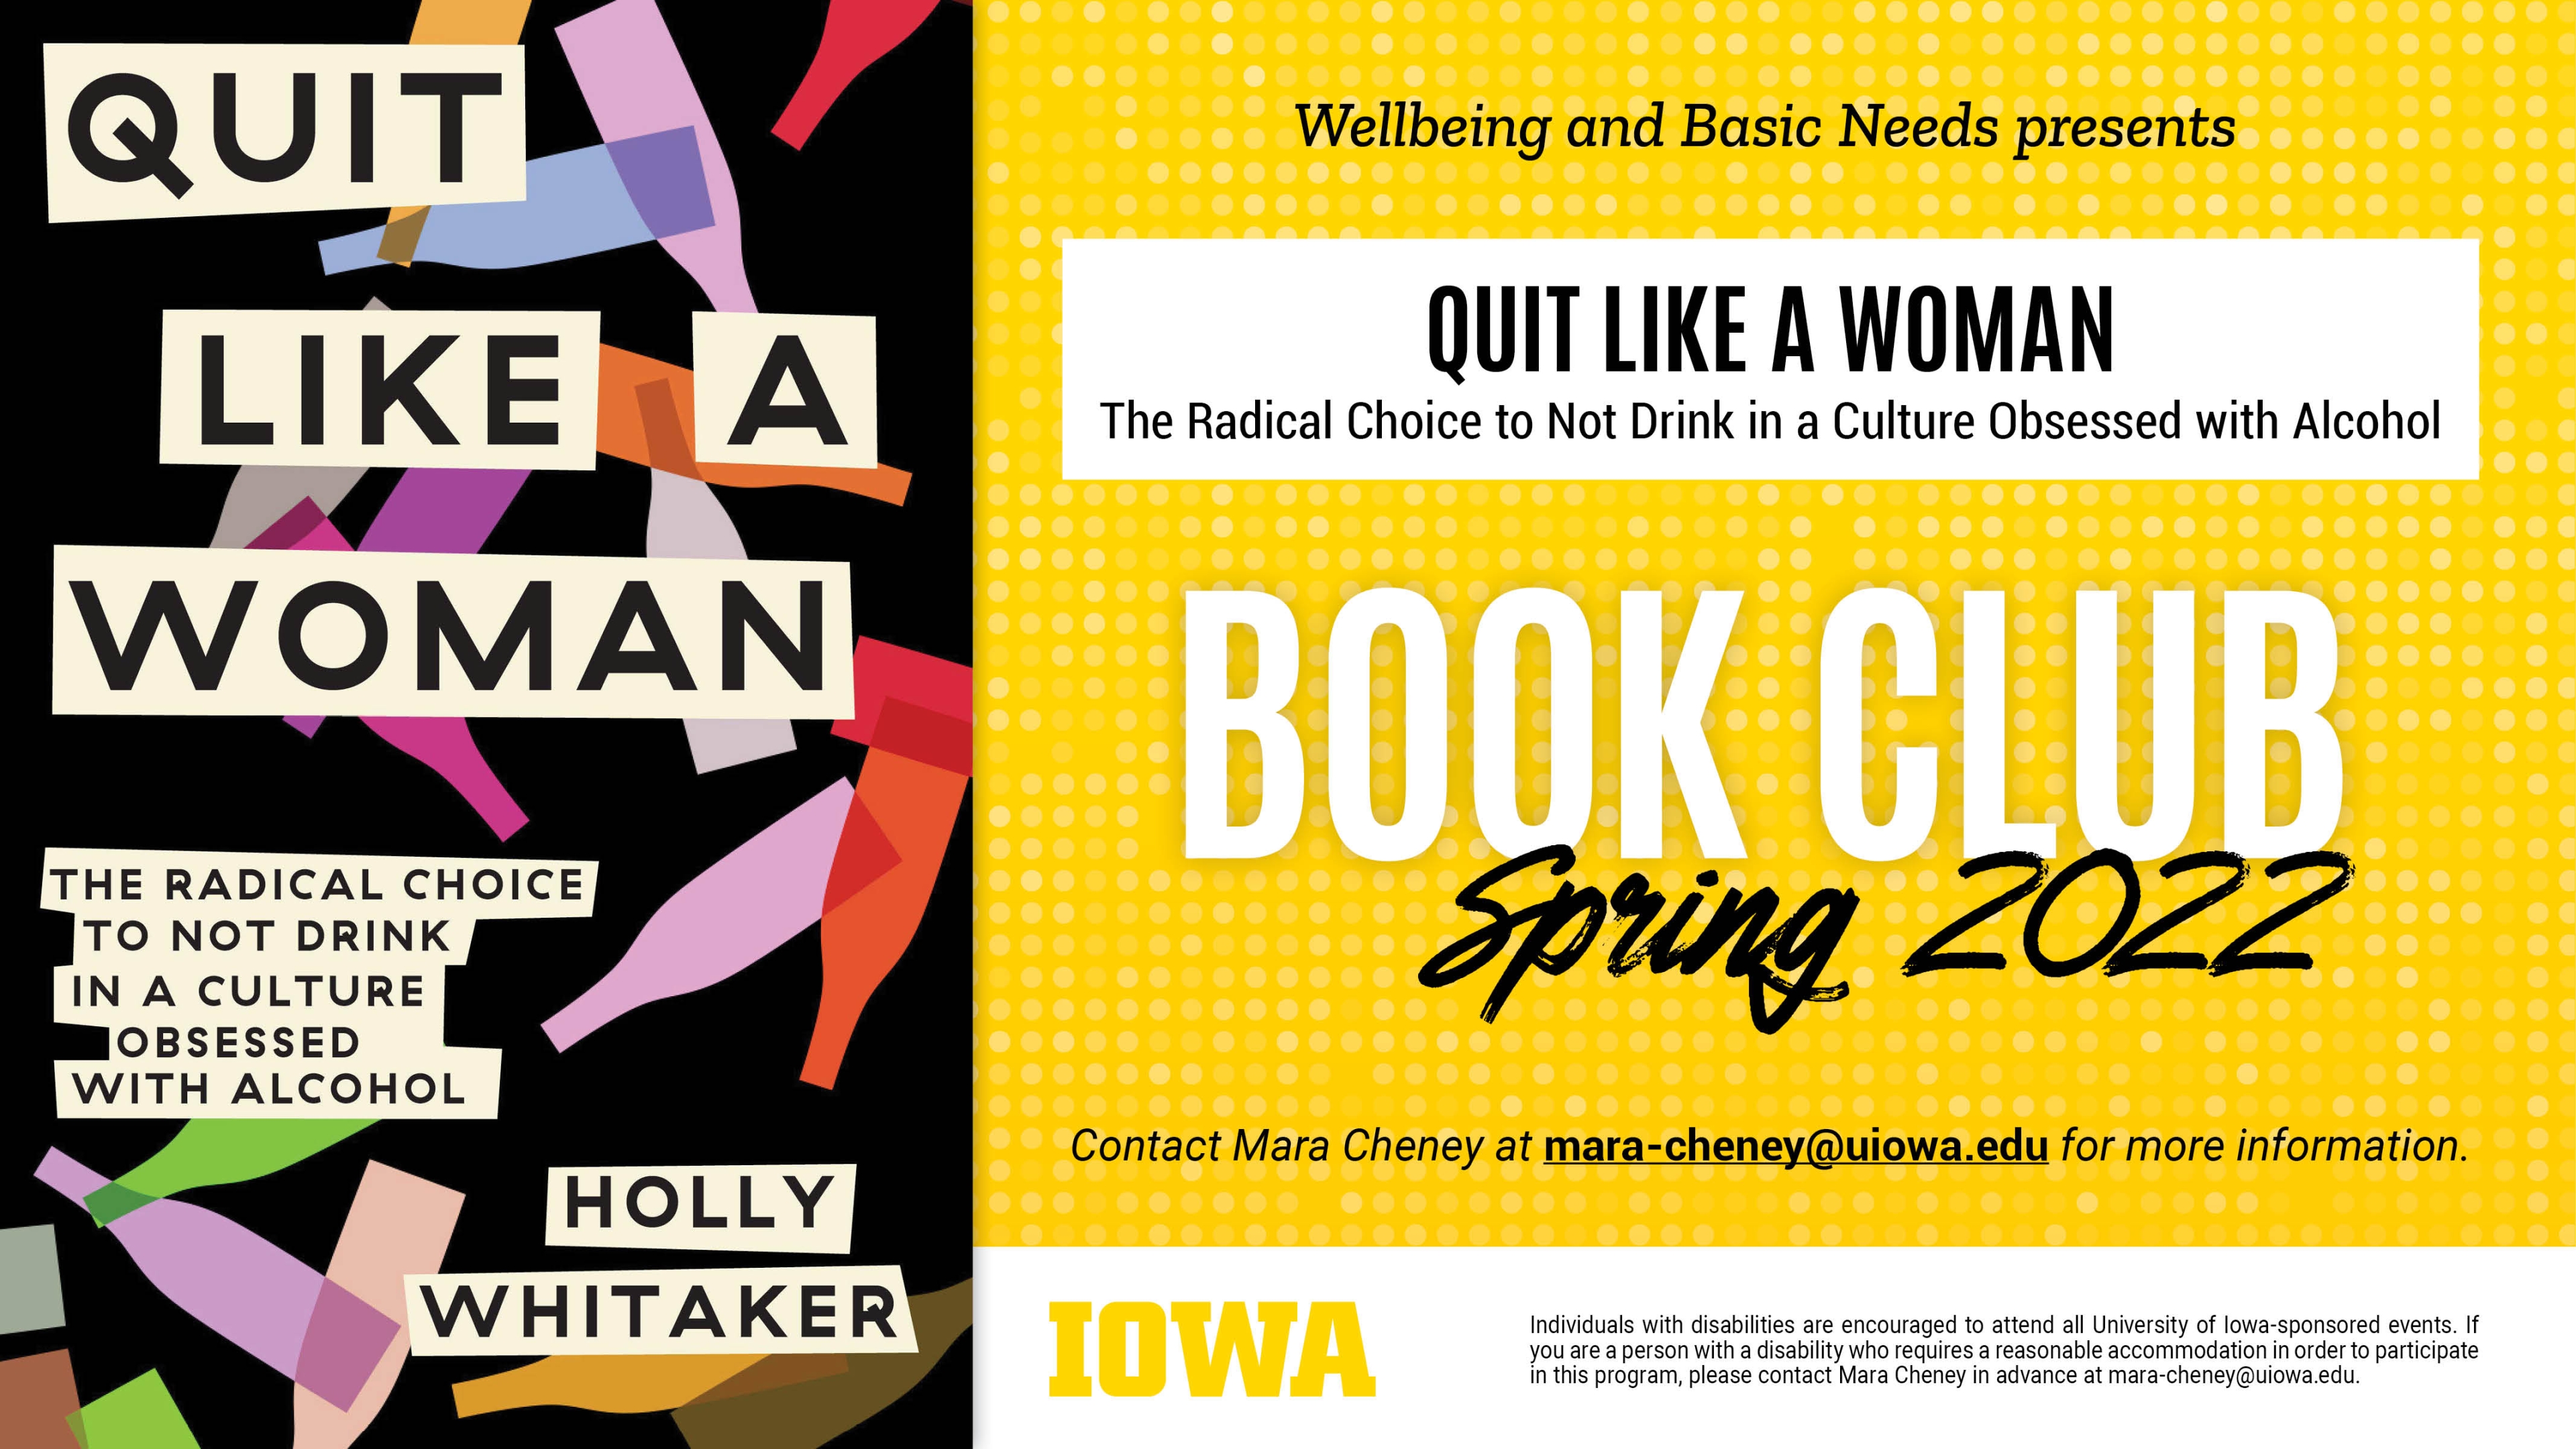 Wellbeing and Basic Needs presents Quit Like a Woman. The Radical Choice to Not Drink in a Culture Obsessed with Alcohol Book Club Spring 2022 Contact Mara Cheney at mara-cheney@uiowa.edu for more information.